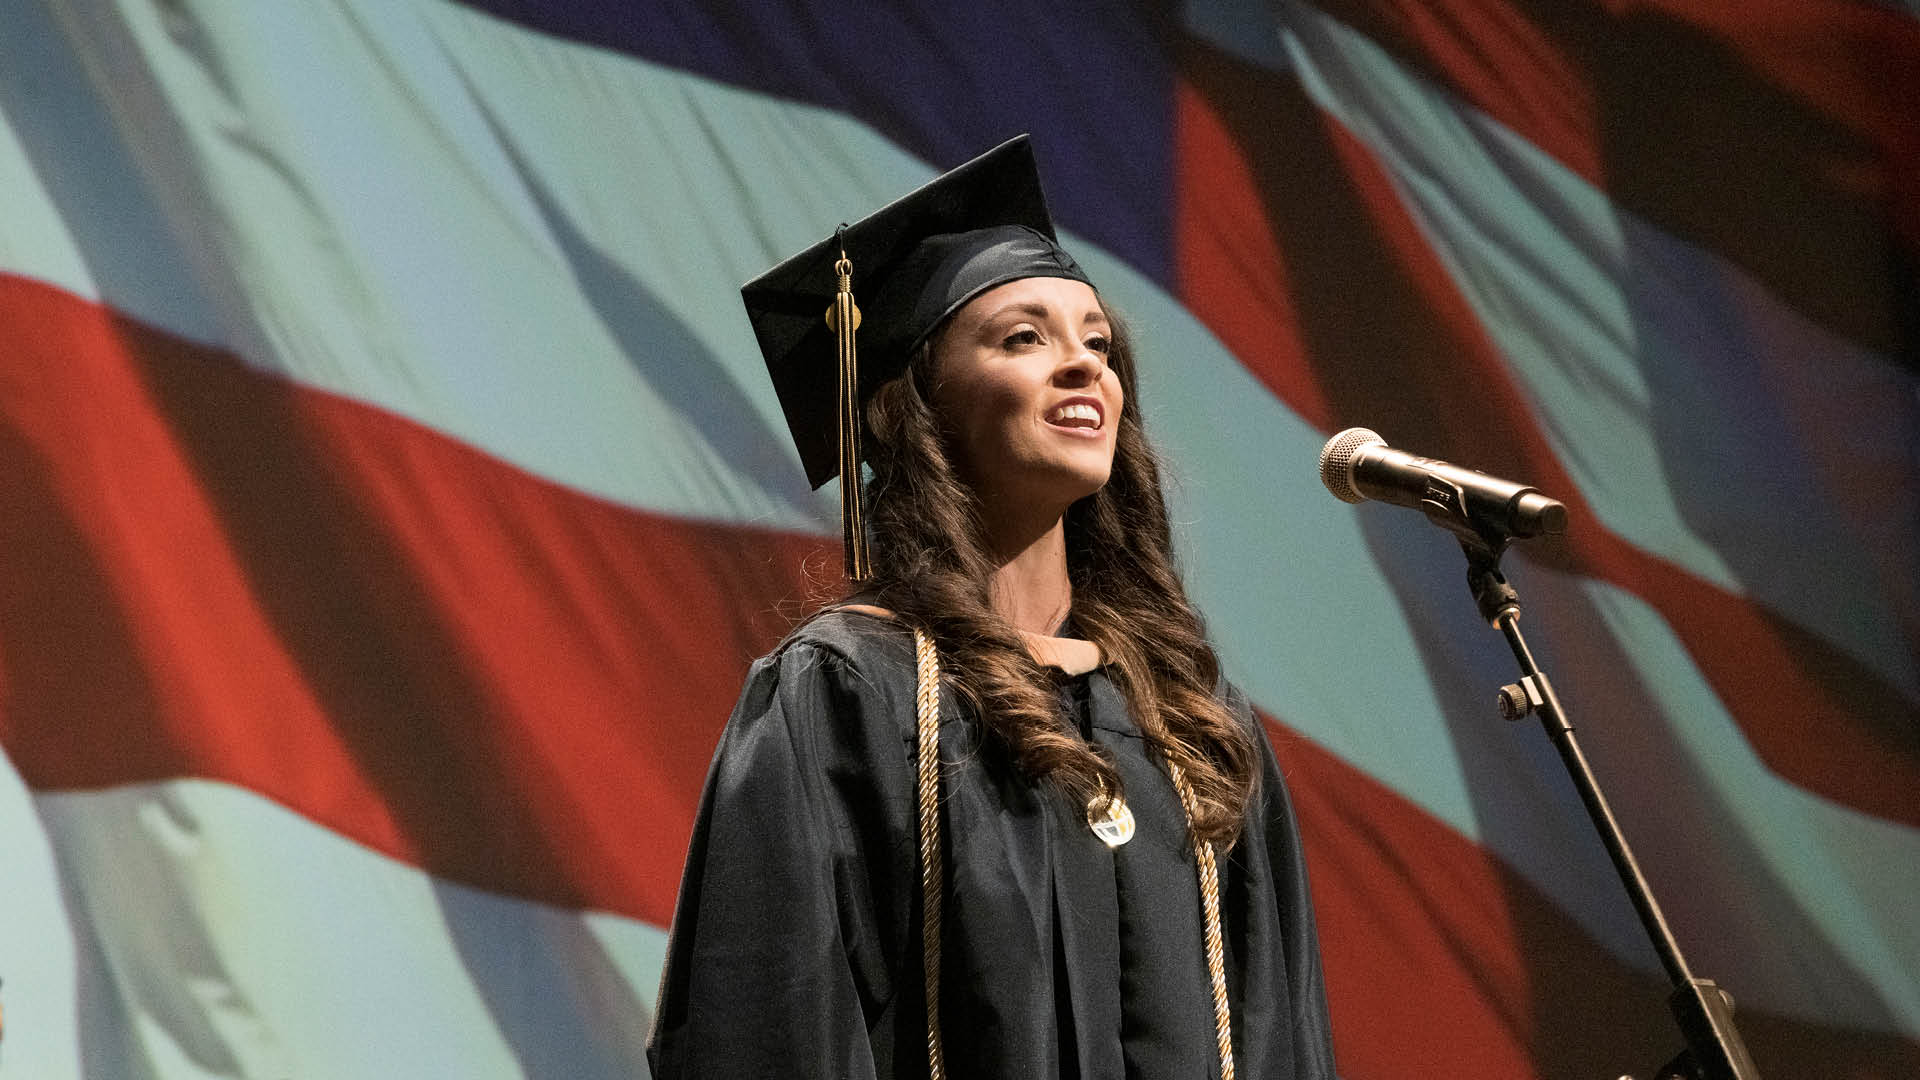 Bruso sings in her cap and gown, with the image of the American flag behind her